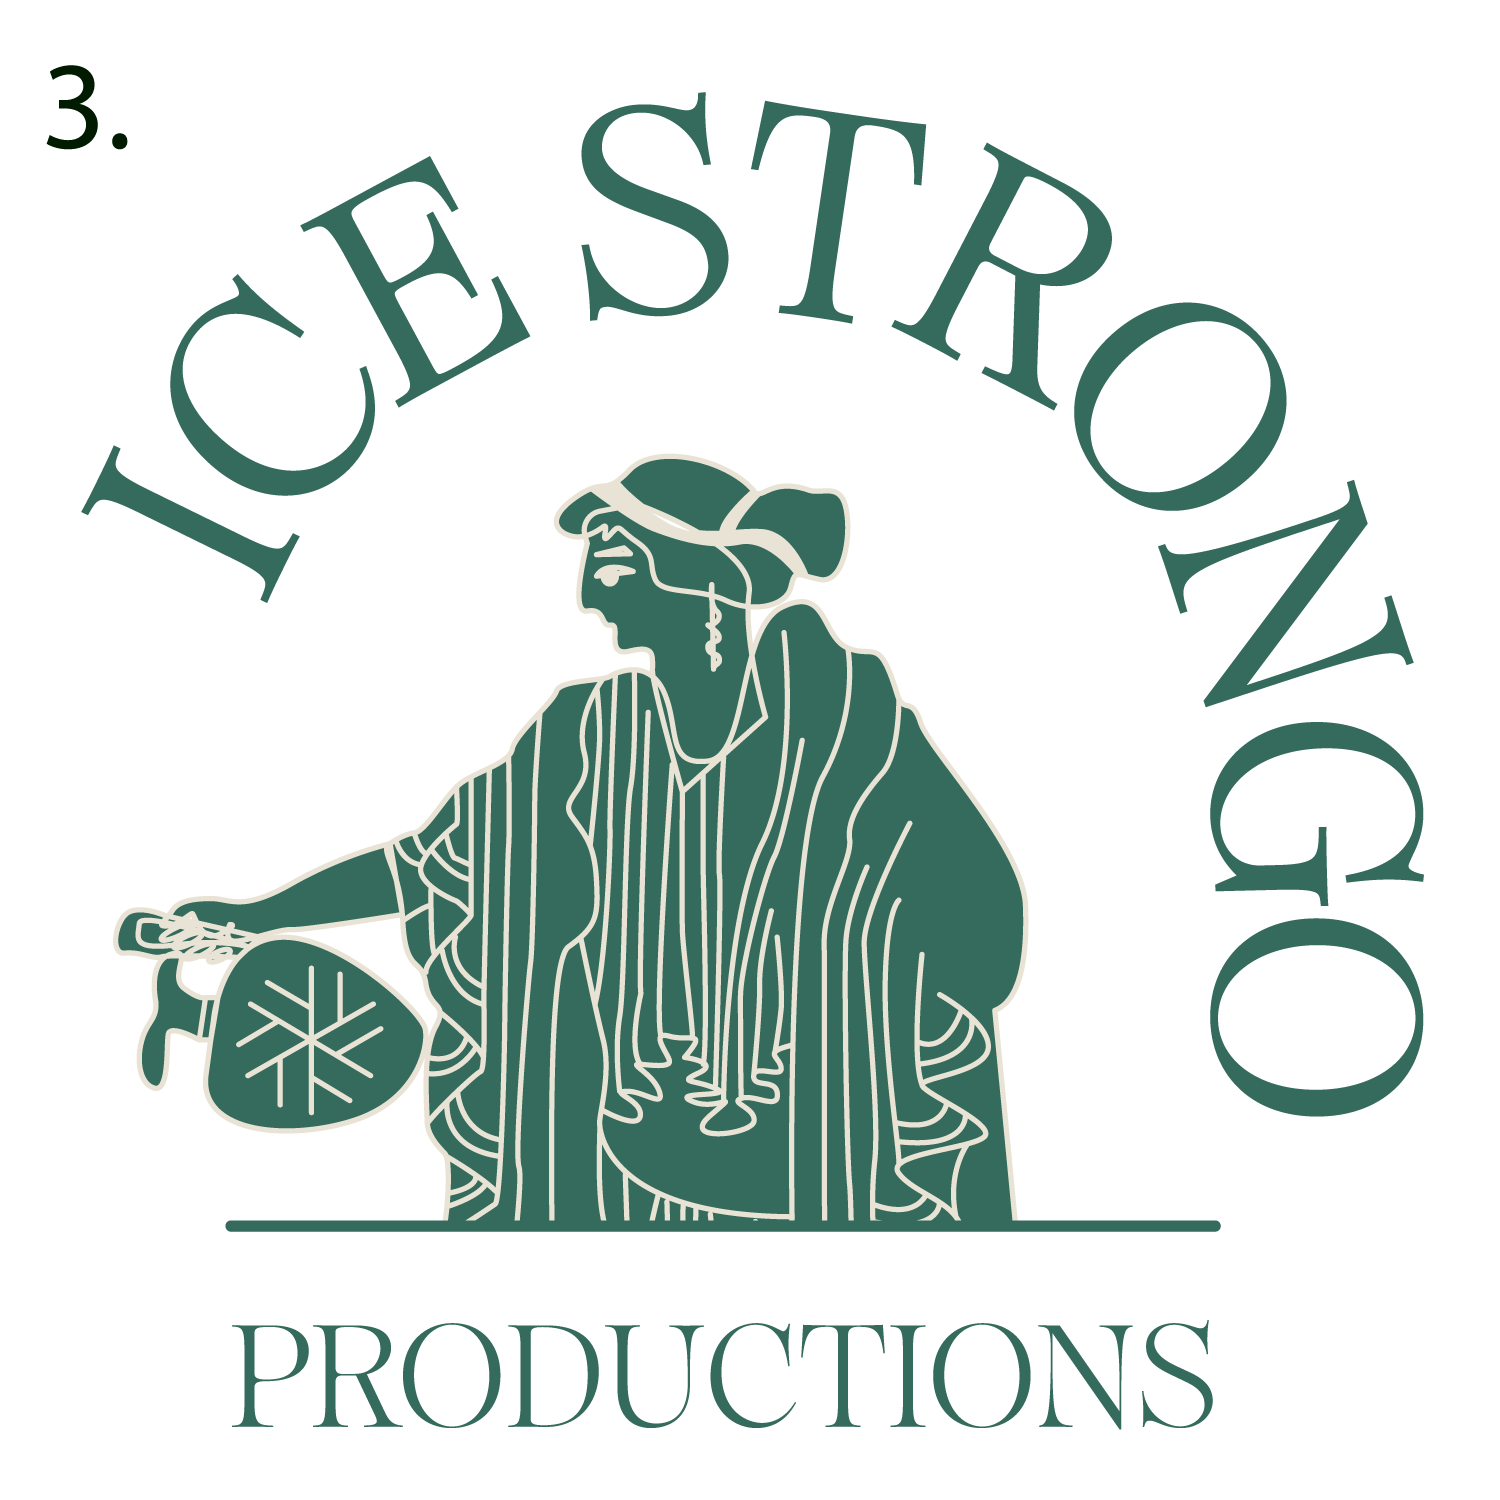 IceStrongo-Productions-LOGO-PROOFv1-03.png